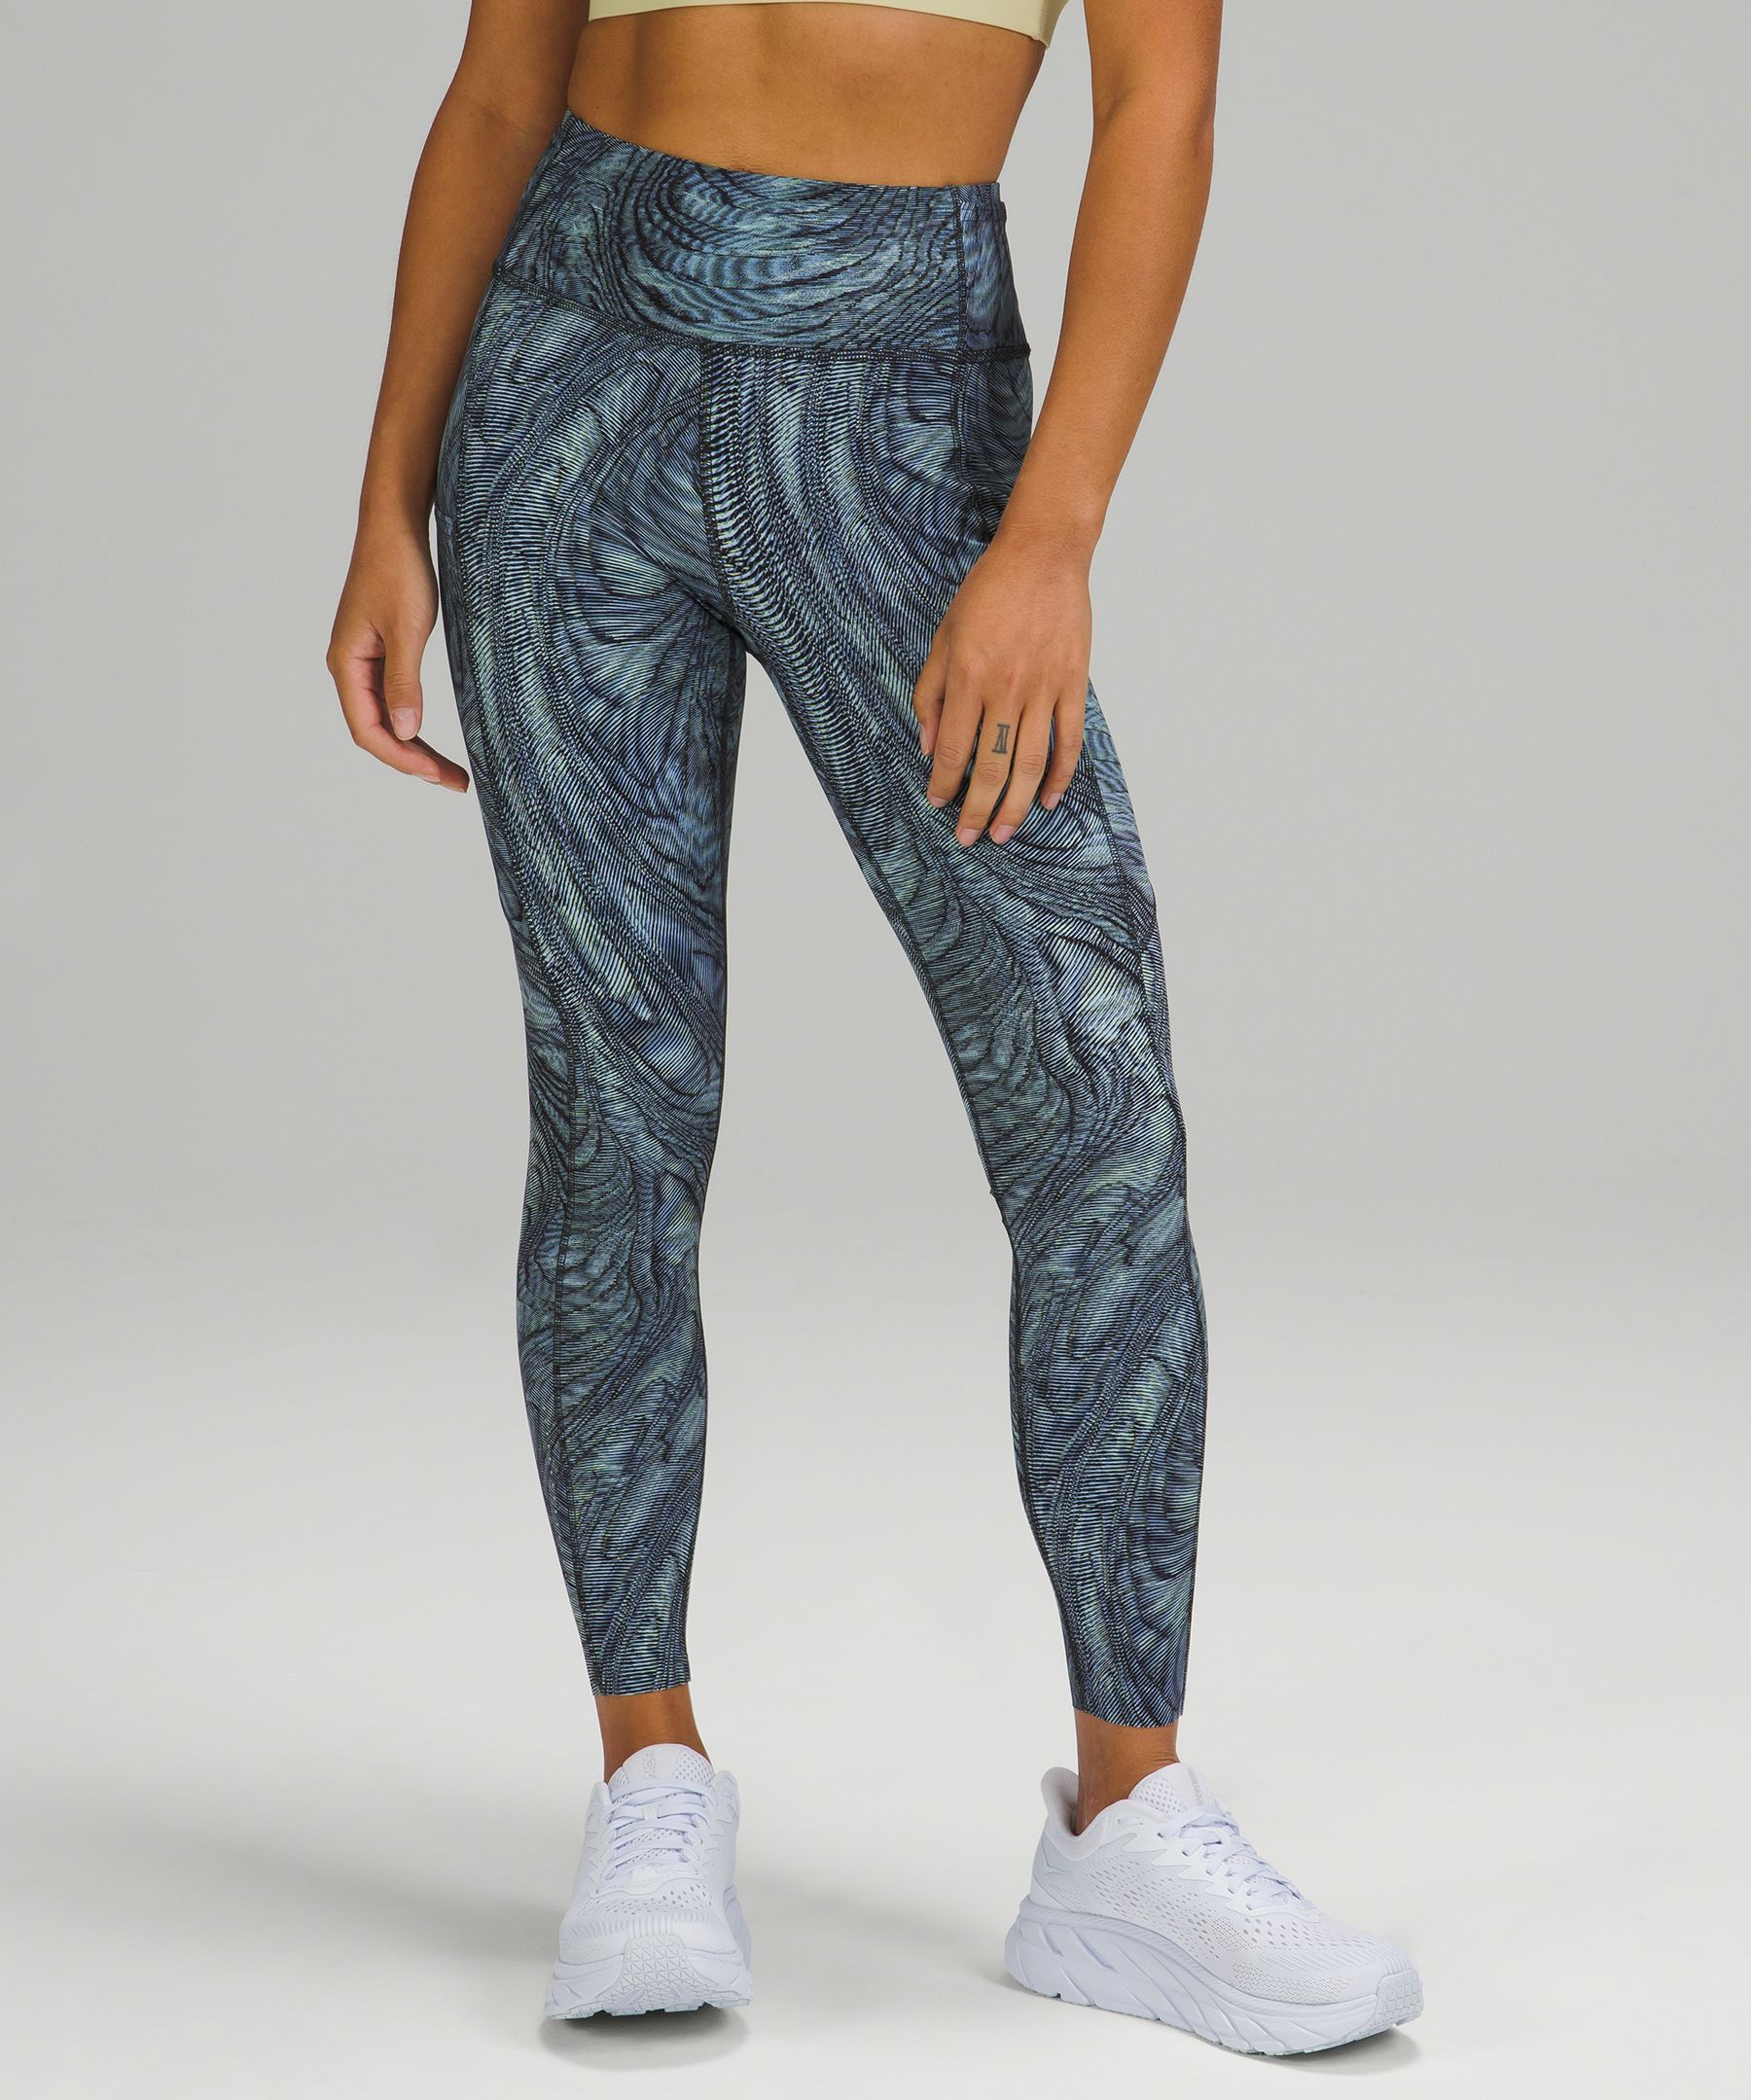 Lululemon Fit Review: Wunder Under HR 7/8 Tight *Mesh, The Ease